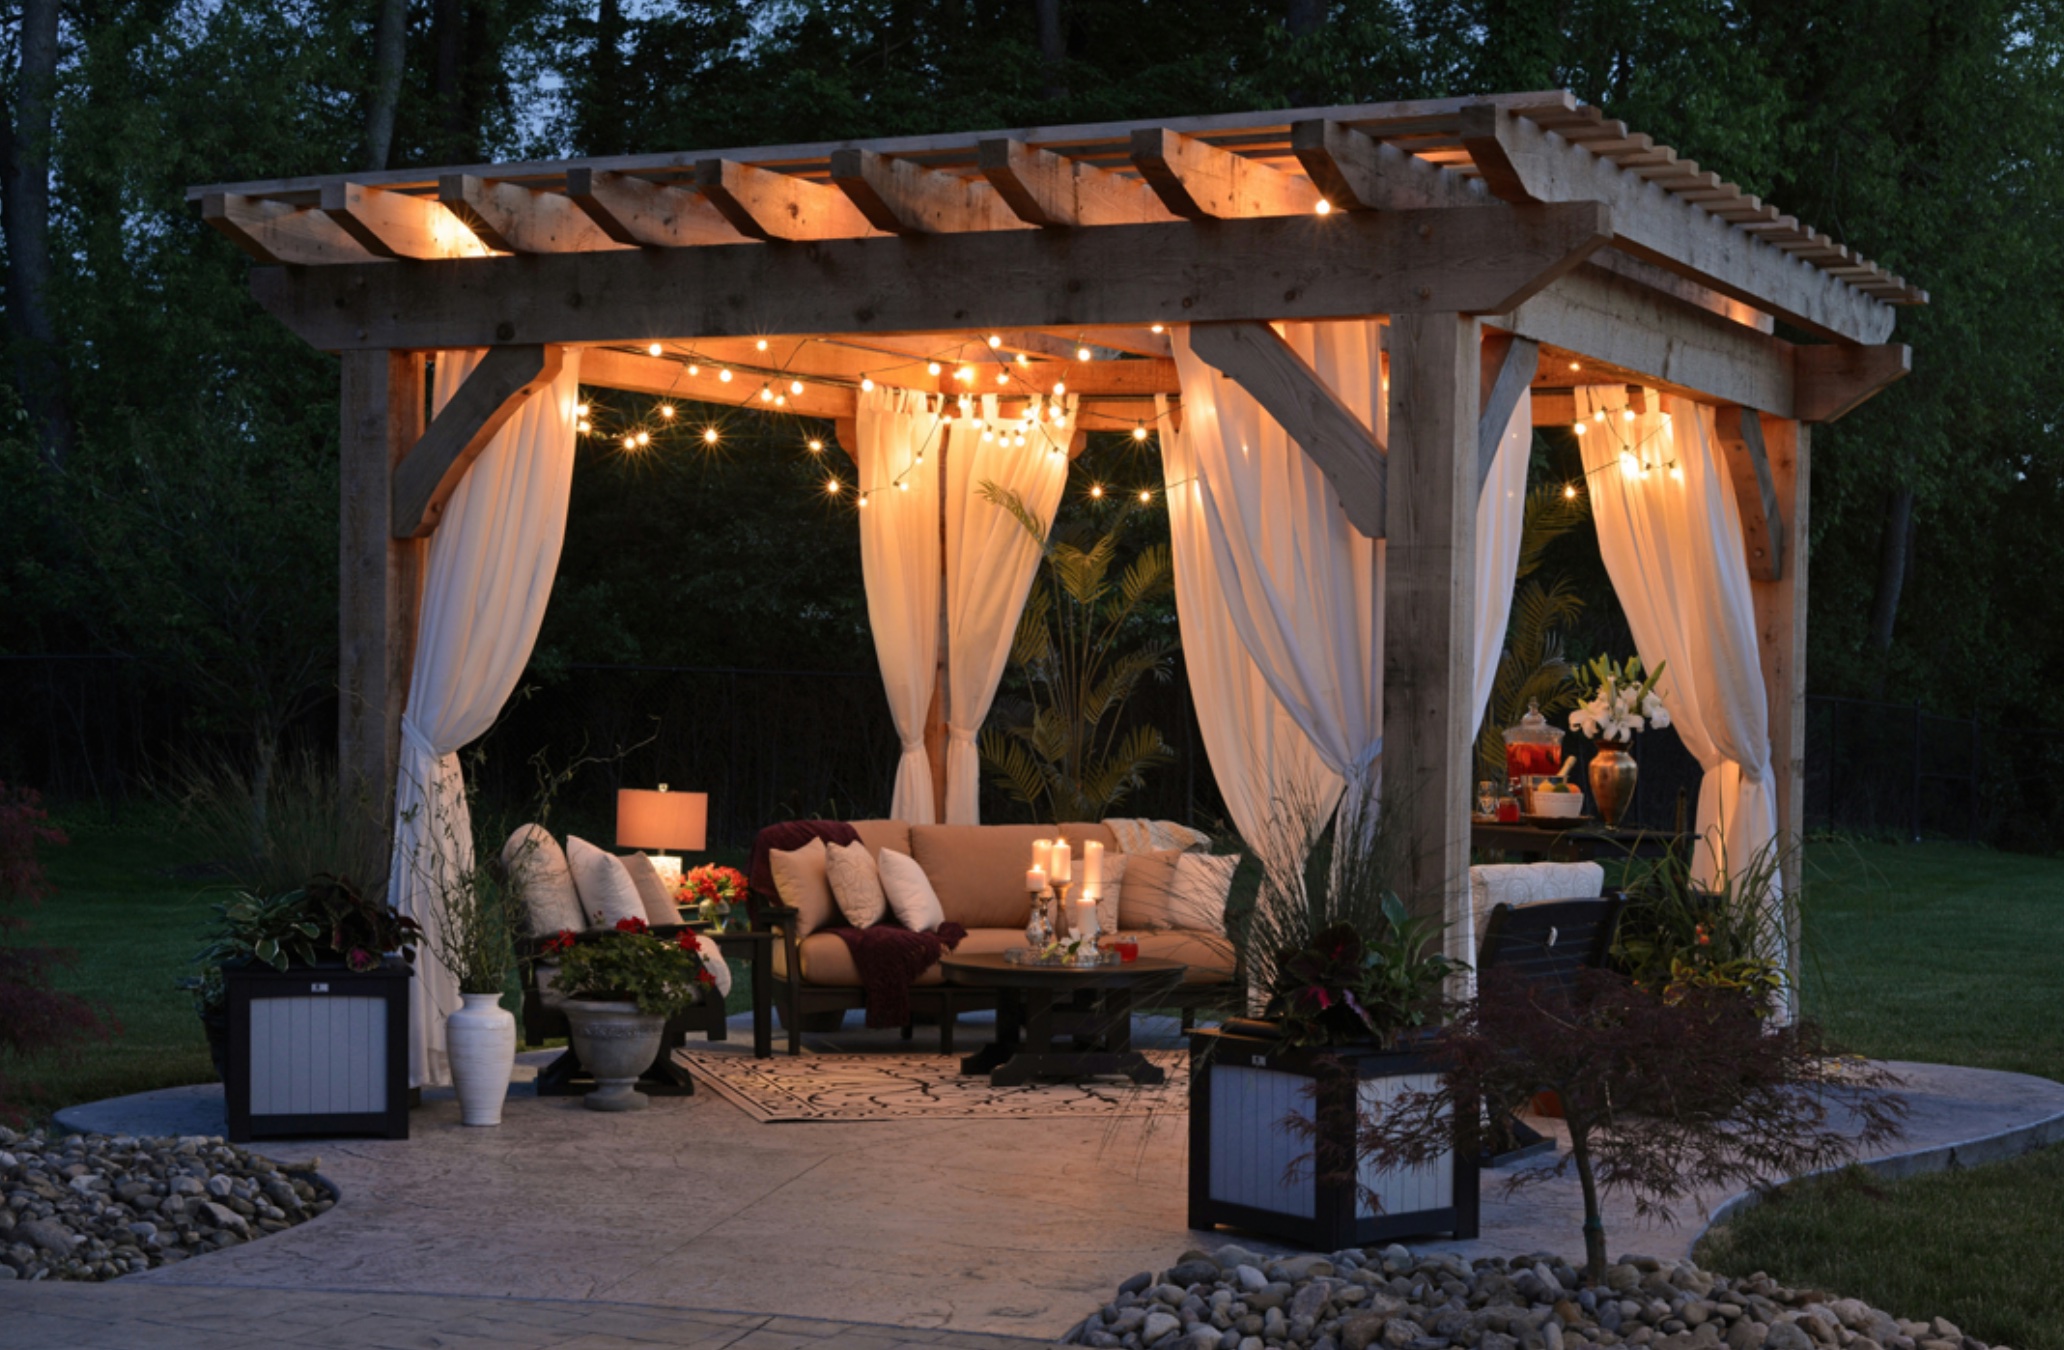 Gazebo with curtain and string lights at night; image by Randy Fath, via Unsplash.com.